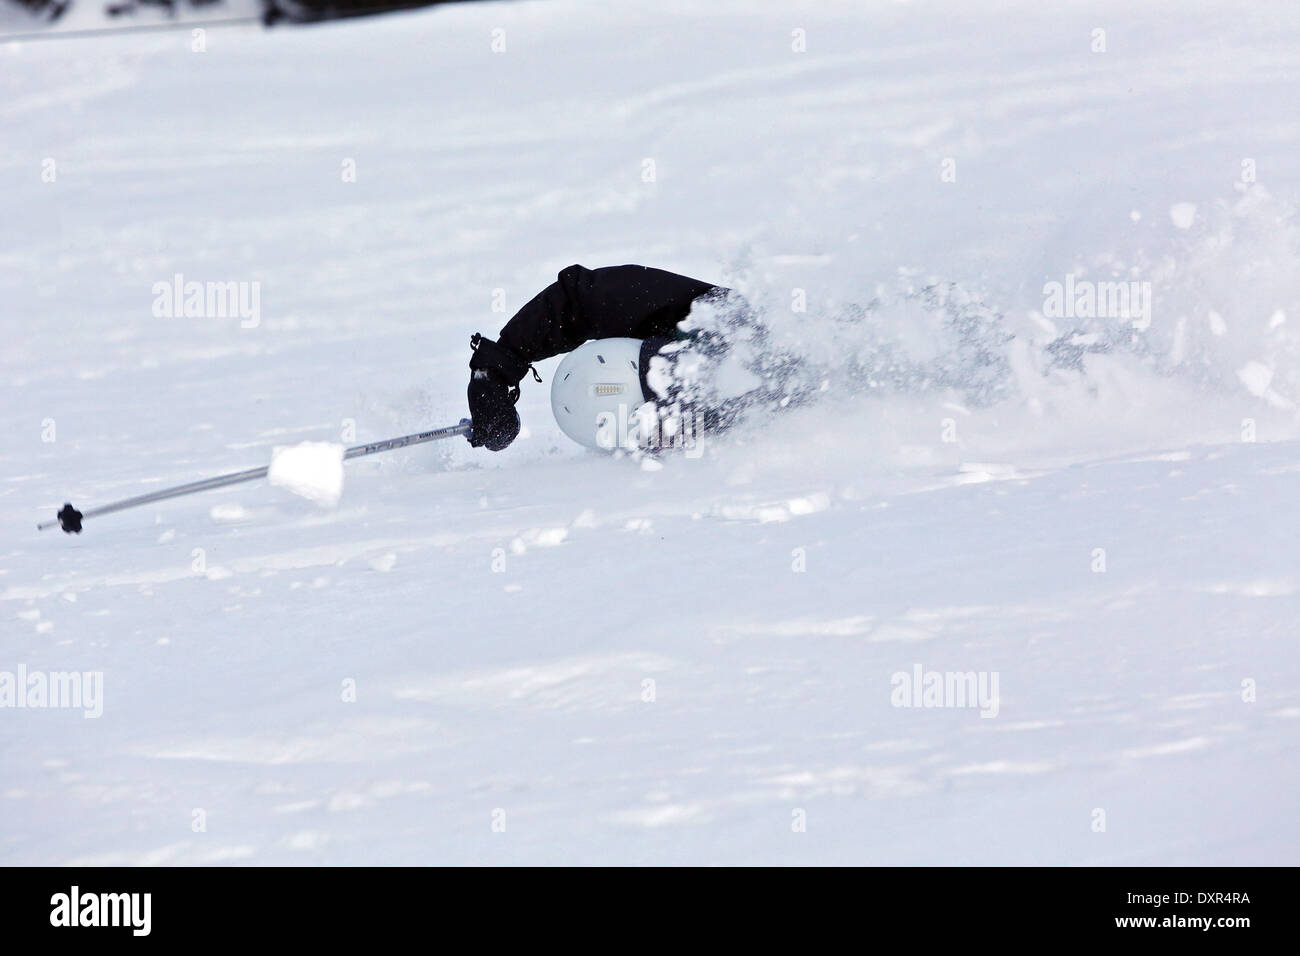 Krippenbrunn, Austria, is a boy crashed while skiing Stock Photo